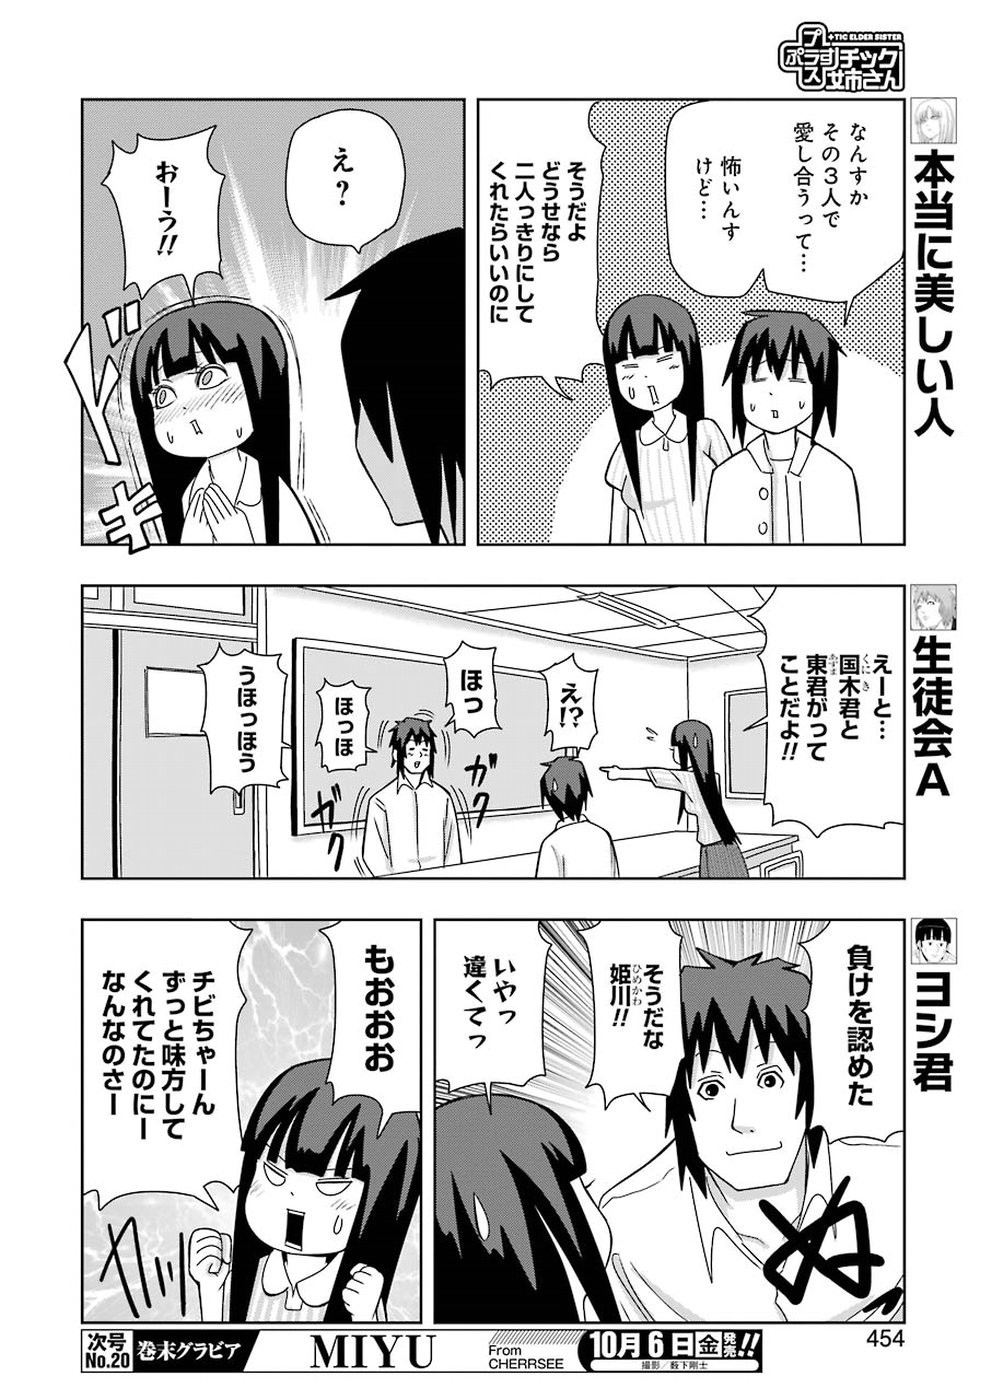 + Tic Nee-san - Chapter 152 - Page 4